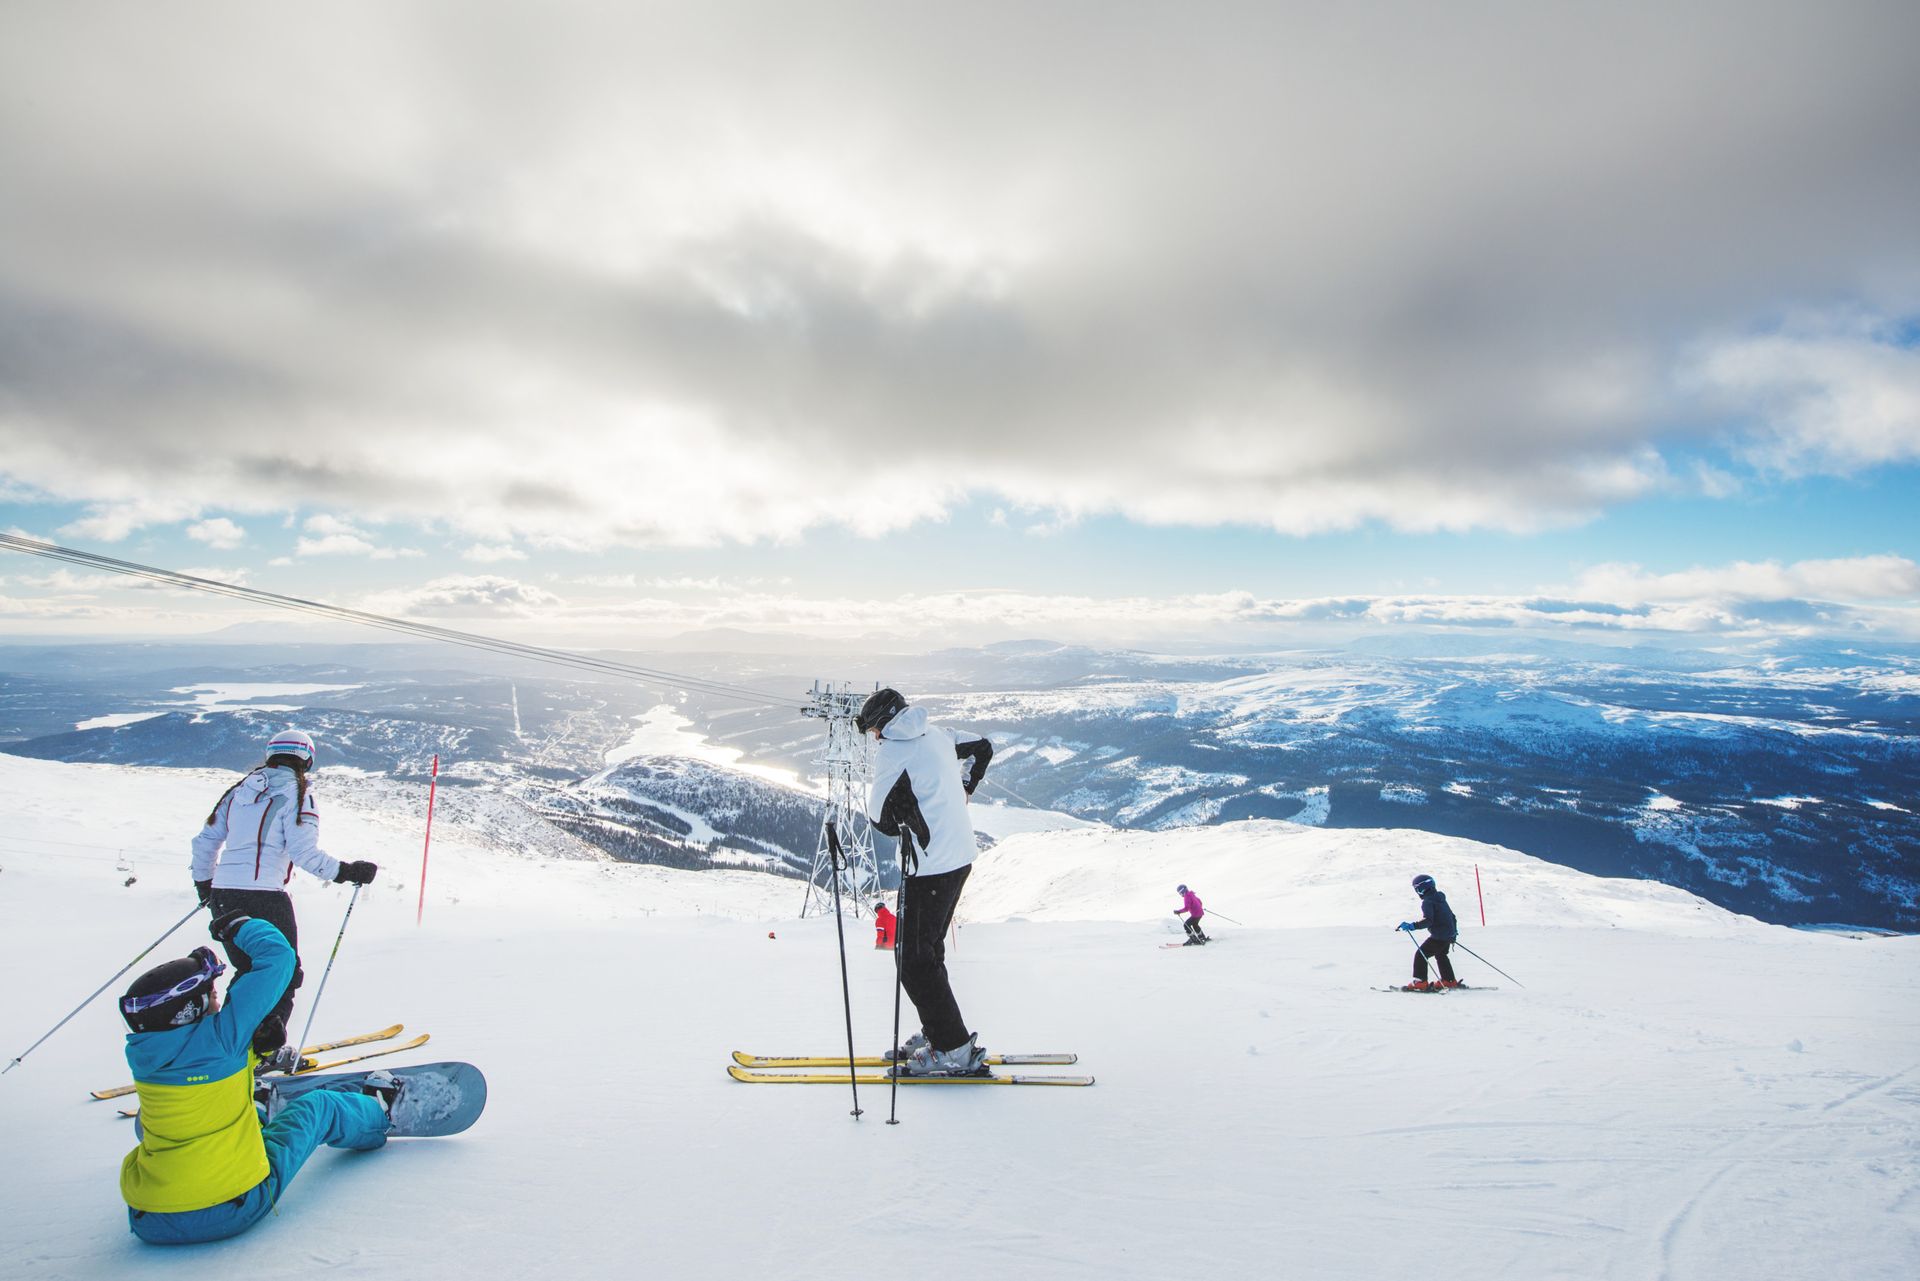 Skiers and snowboarders on a snowy mountain slope with a panoramic view of Åre.